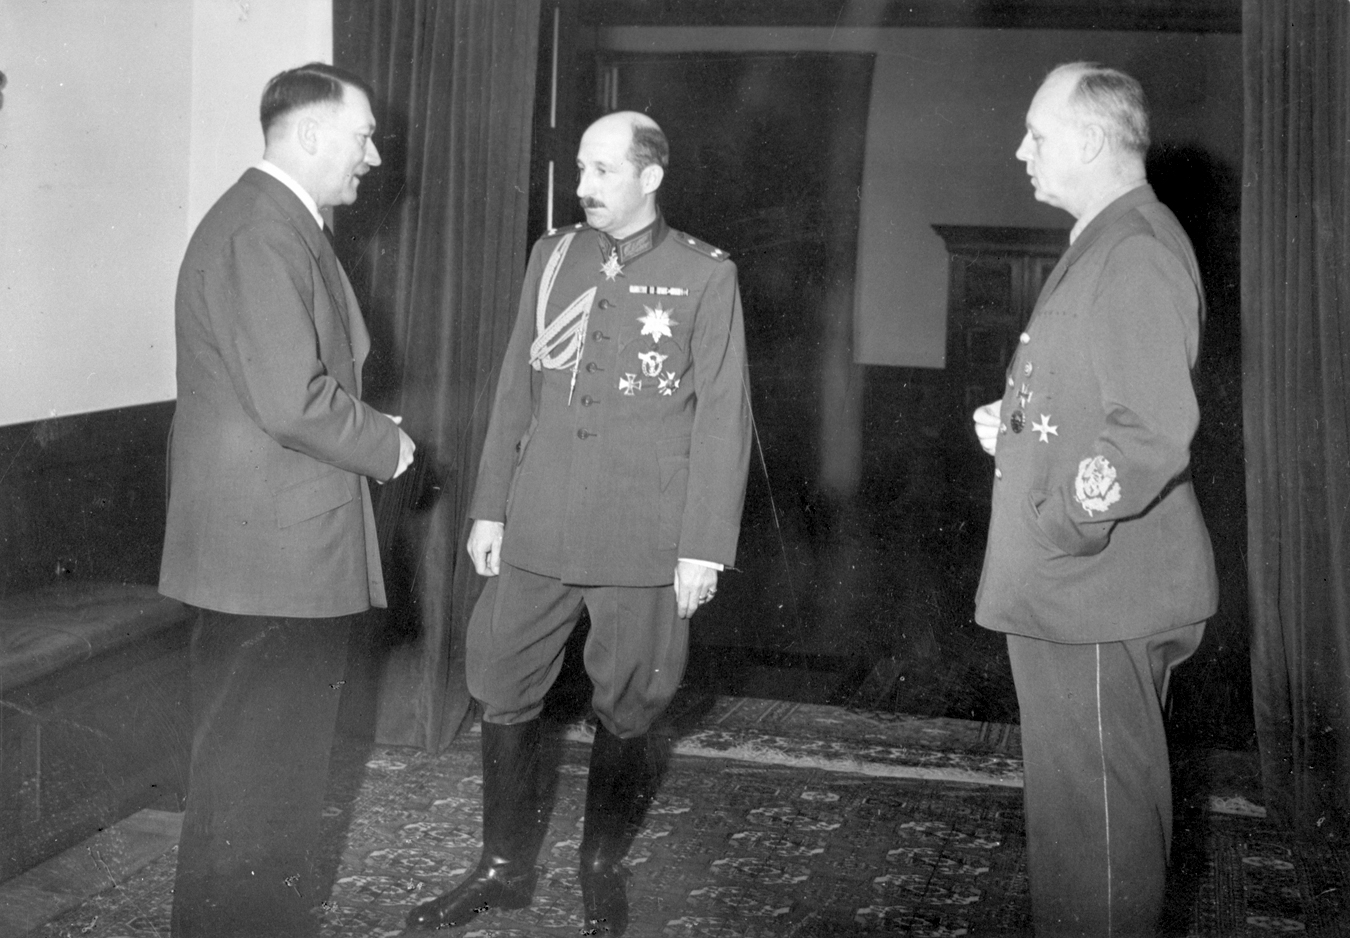 Adolf Hitler in conversation with Zar Boris III and Joachim von Ribbentrop in the great hall of the Berghof, from Eva Braun's albums